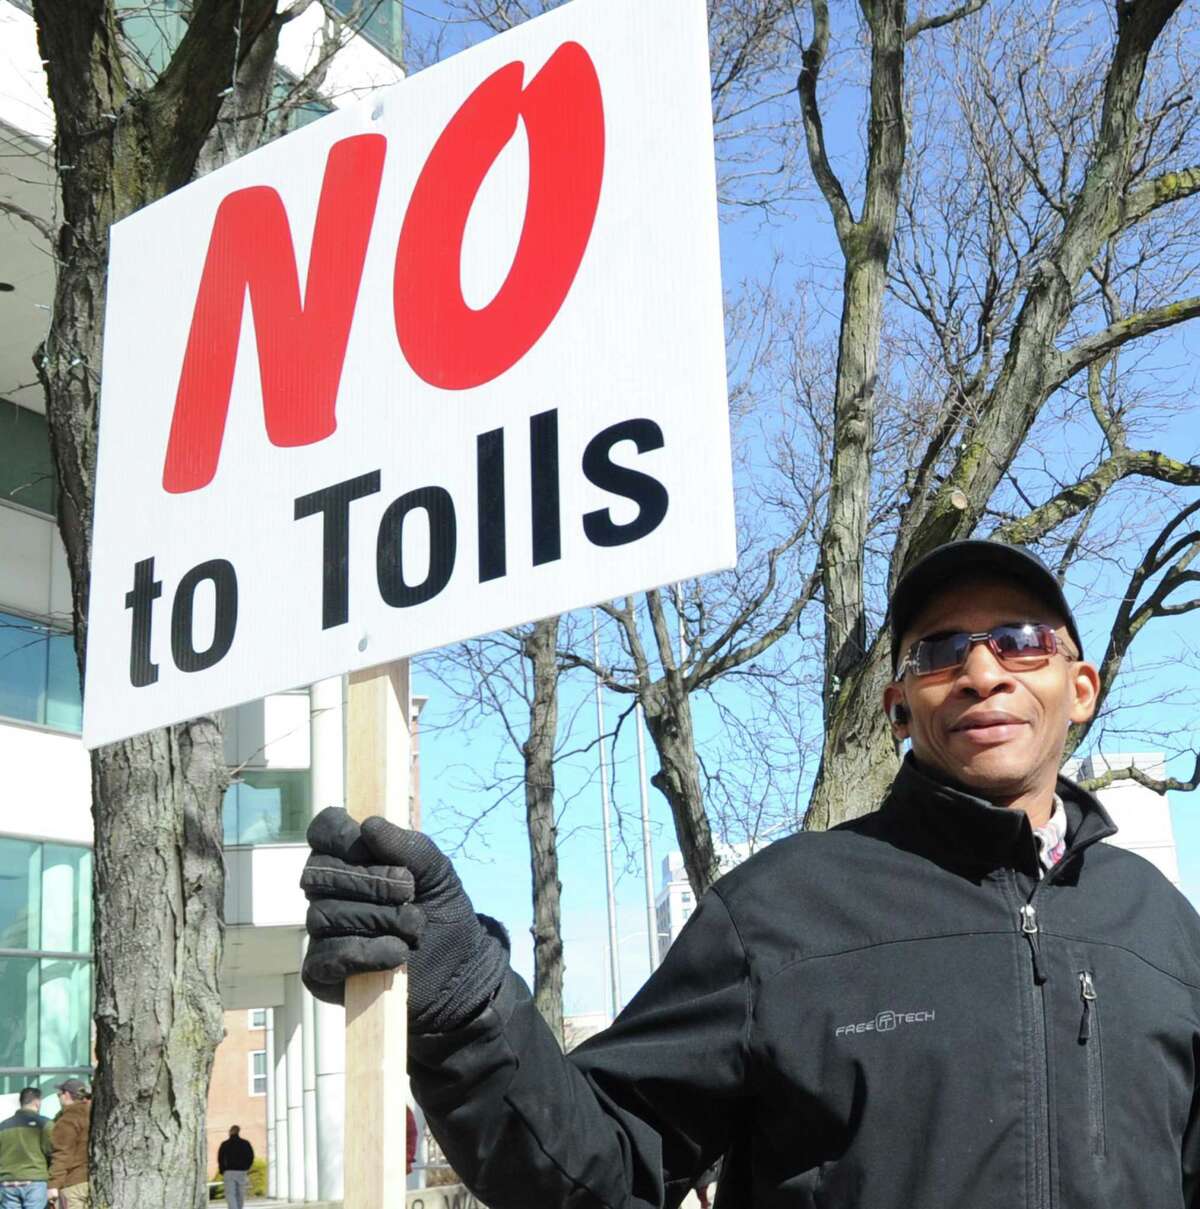 Public protest against tolls, a new gas tax and tire tax, held in front of the Stamford Goverment Center, Stamford, Conn., Saturday, Feb. 17, 2018. Roughly 75 people attended the protest that was accompanied by a caravan of trucks circling the center honking their horns in support of the protest. Gov. Dannel P. Malloy wants legislators to pass measures including electronic tolls, an increase in state gasoline taxes and a new tax on the sale of tires, to pay for Connecticut's transportation system that he says is facing a serious fuding crisis.